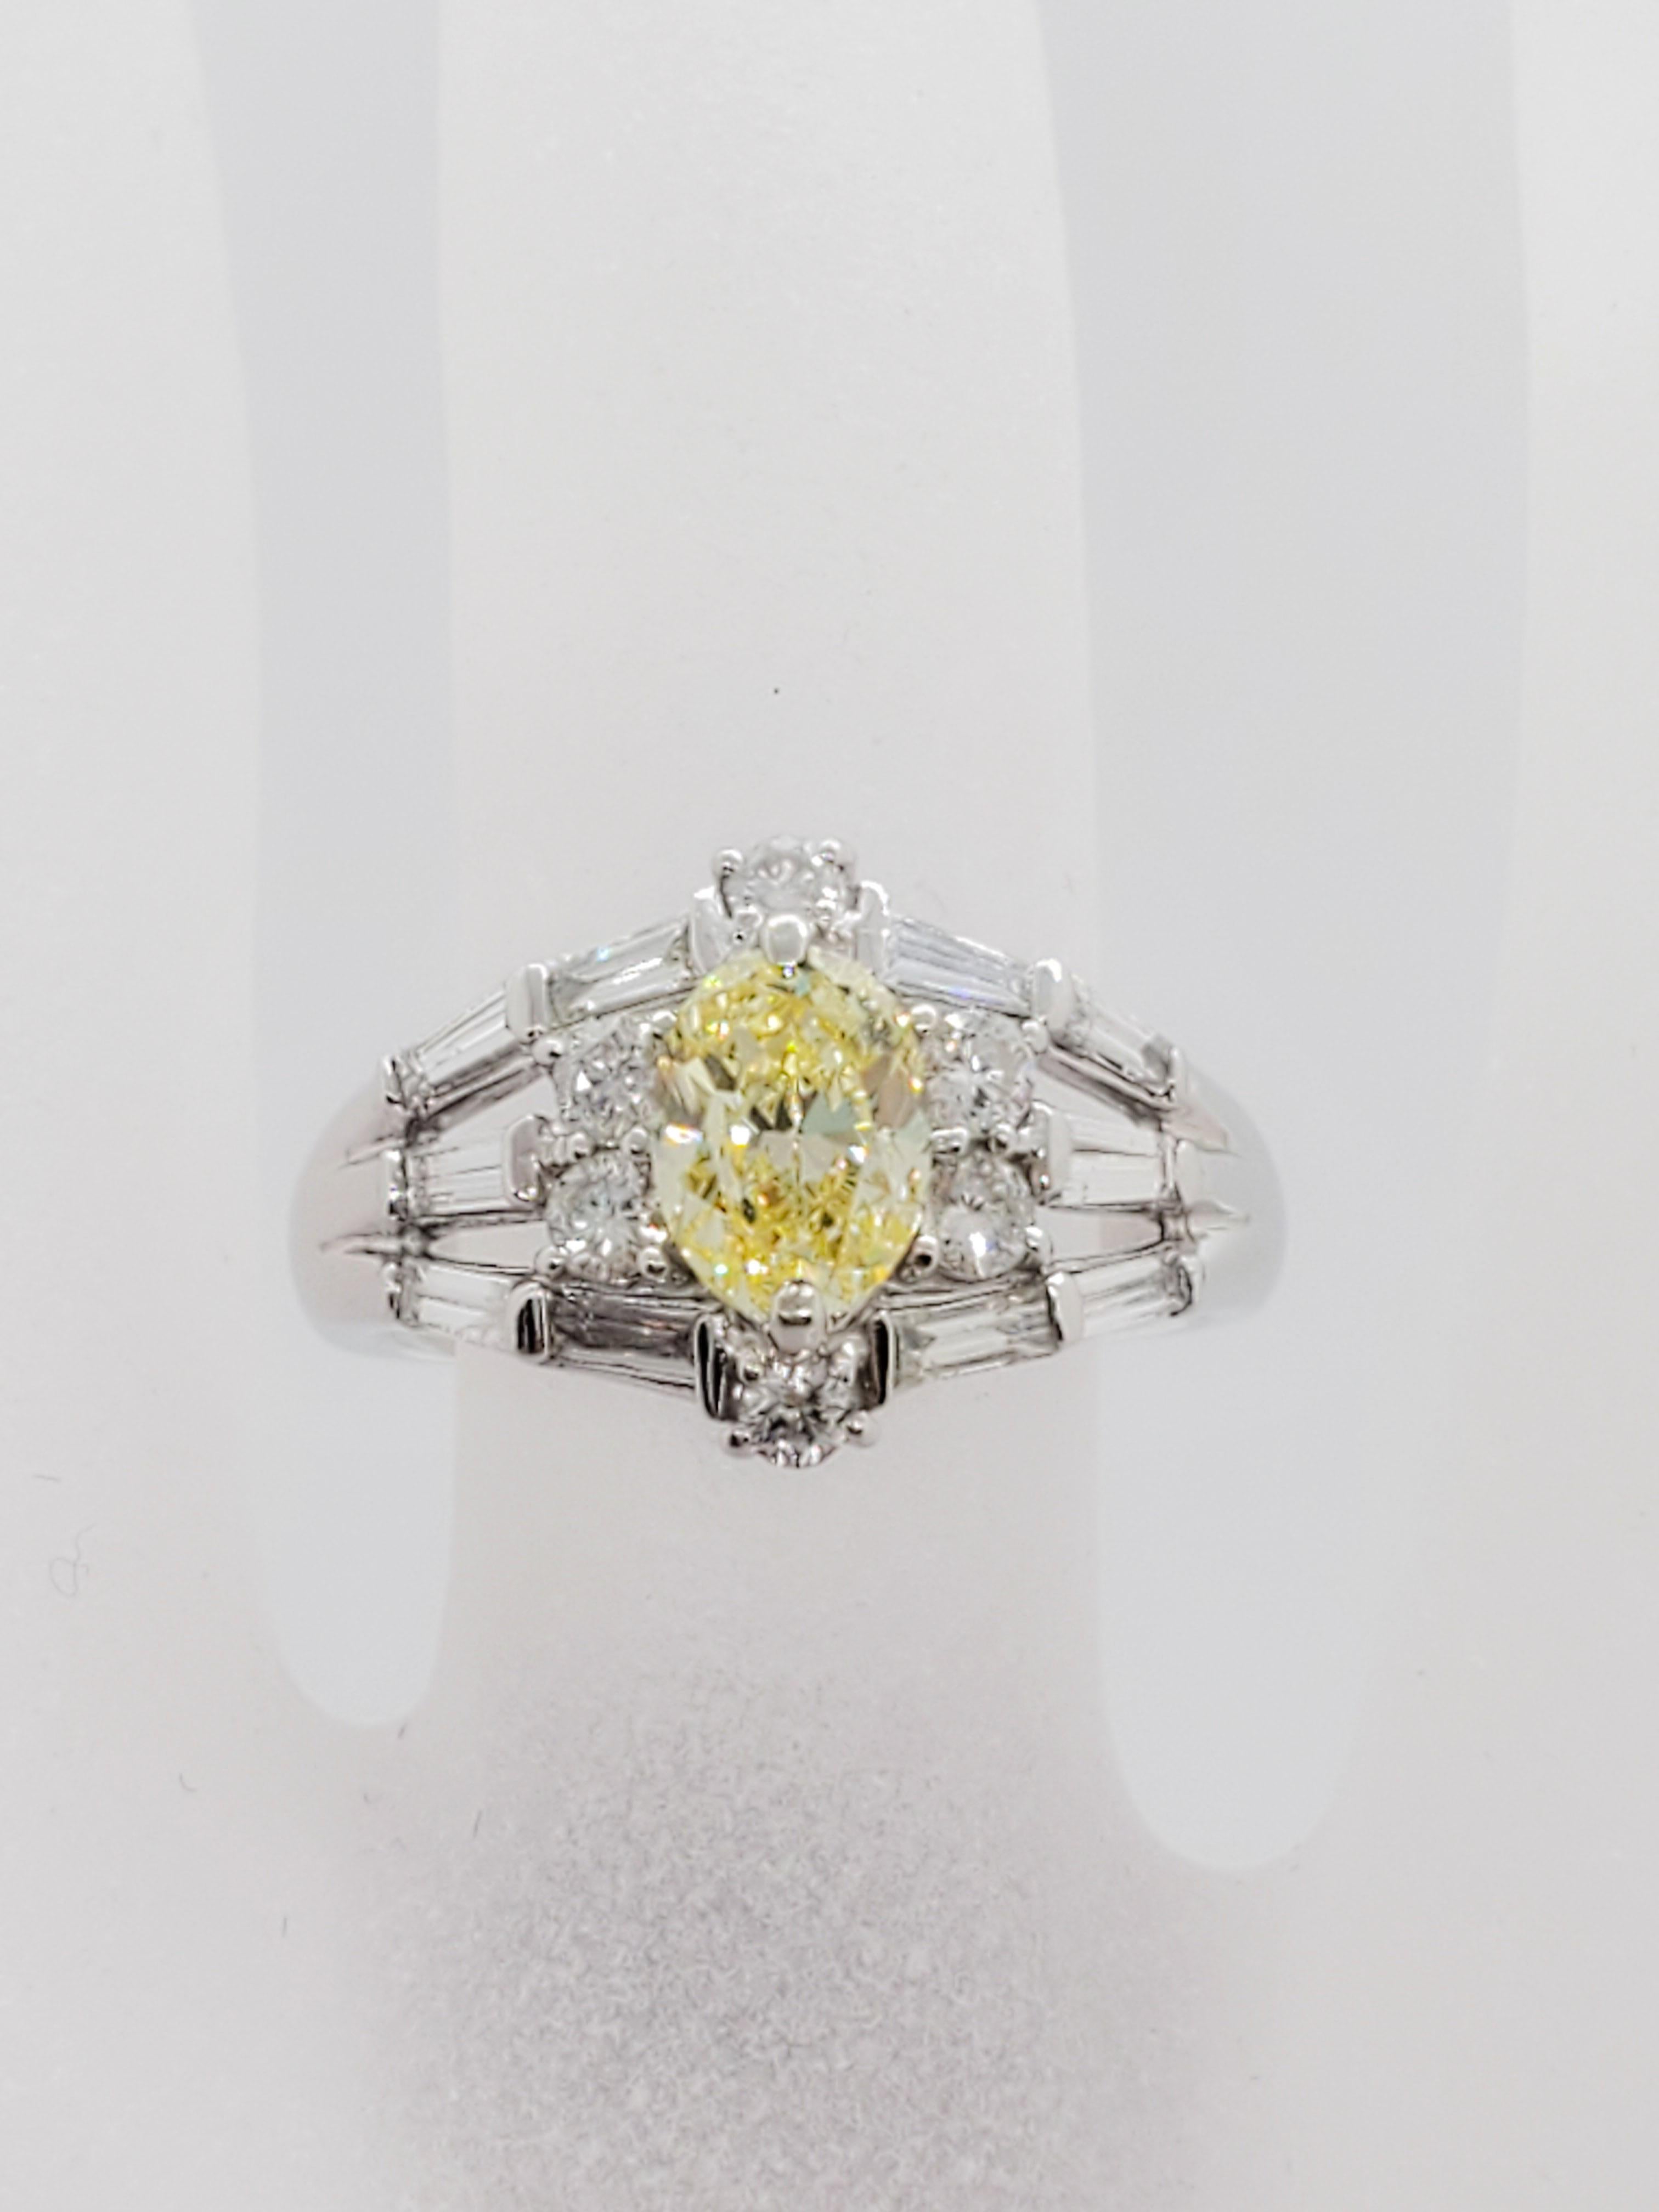 Gorgeous 1.01 ct fancy yellow diamond oval, SI2 clarity.  0.84 ct of white diamond baguettes and rounds in a beautiful handmade platinum mounting.  GIA certified and size 6.  A great ring for engagement or right hand.  